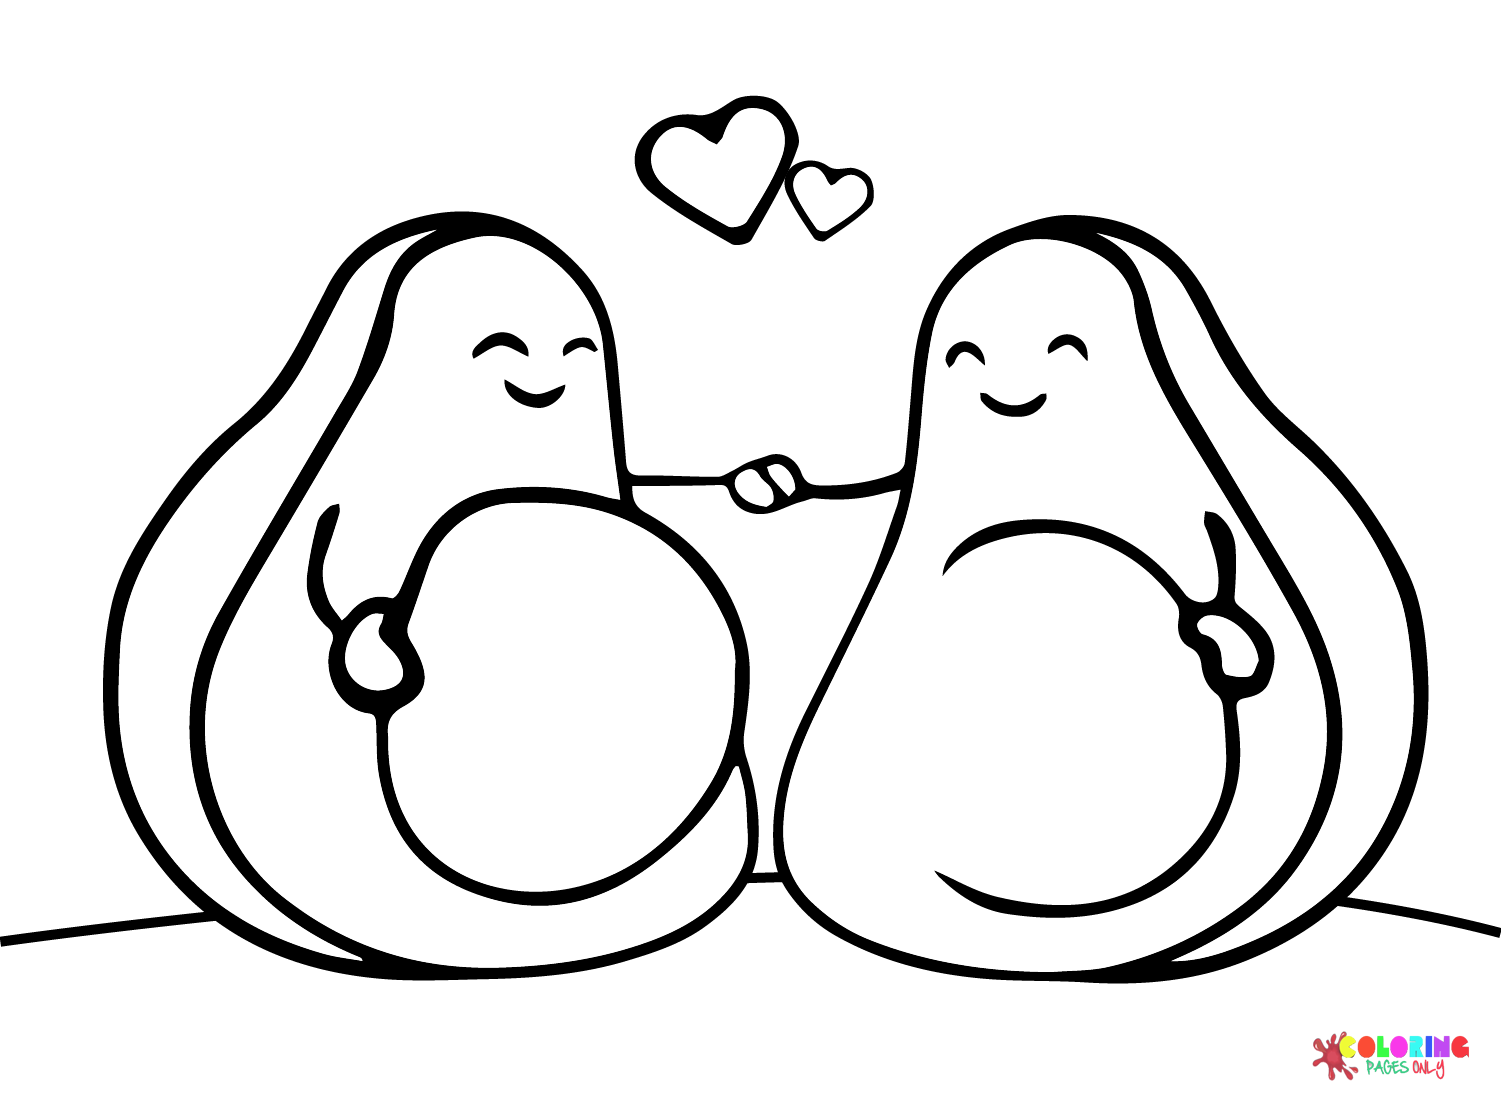 Avocado in Love Coloring Page